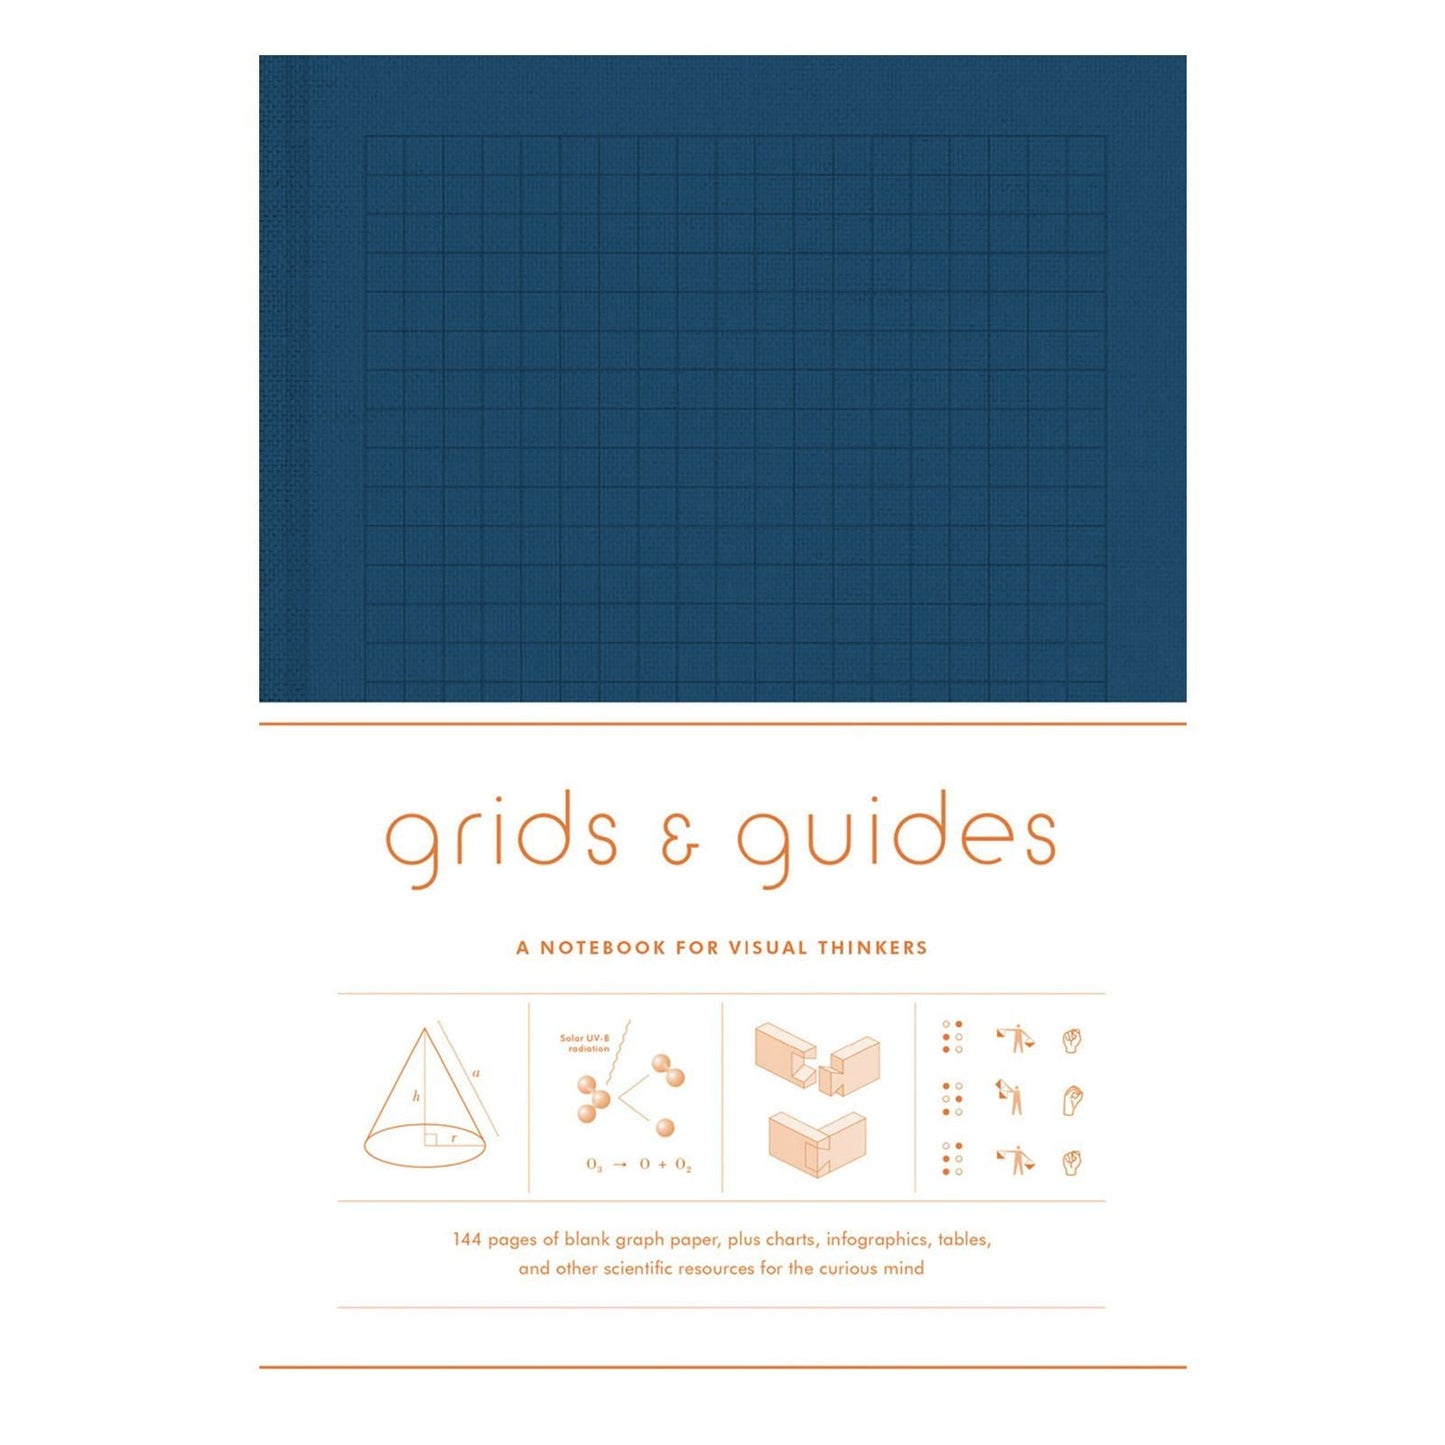 Grids & Guides (Navy): A Notebook for Visual Thinkers ( Grids & Guides )